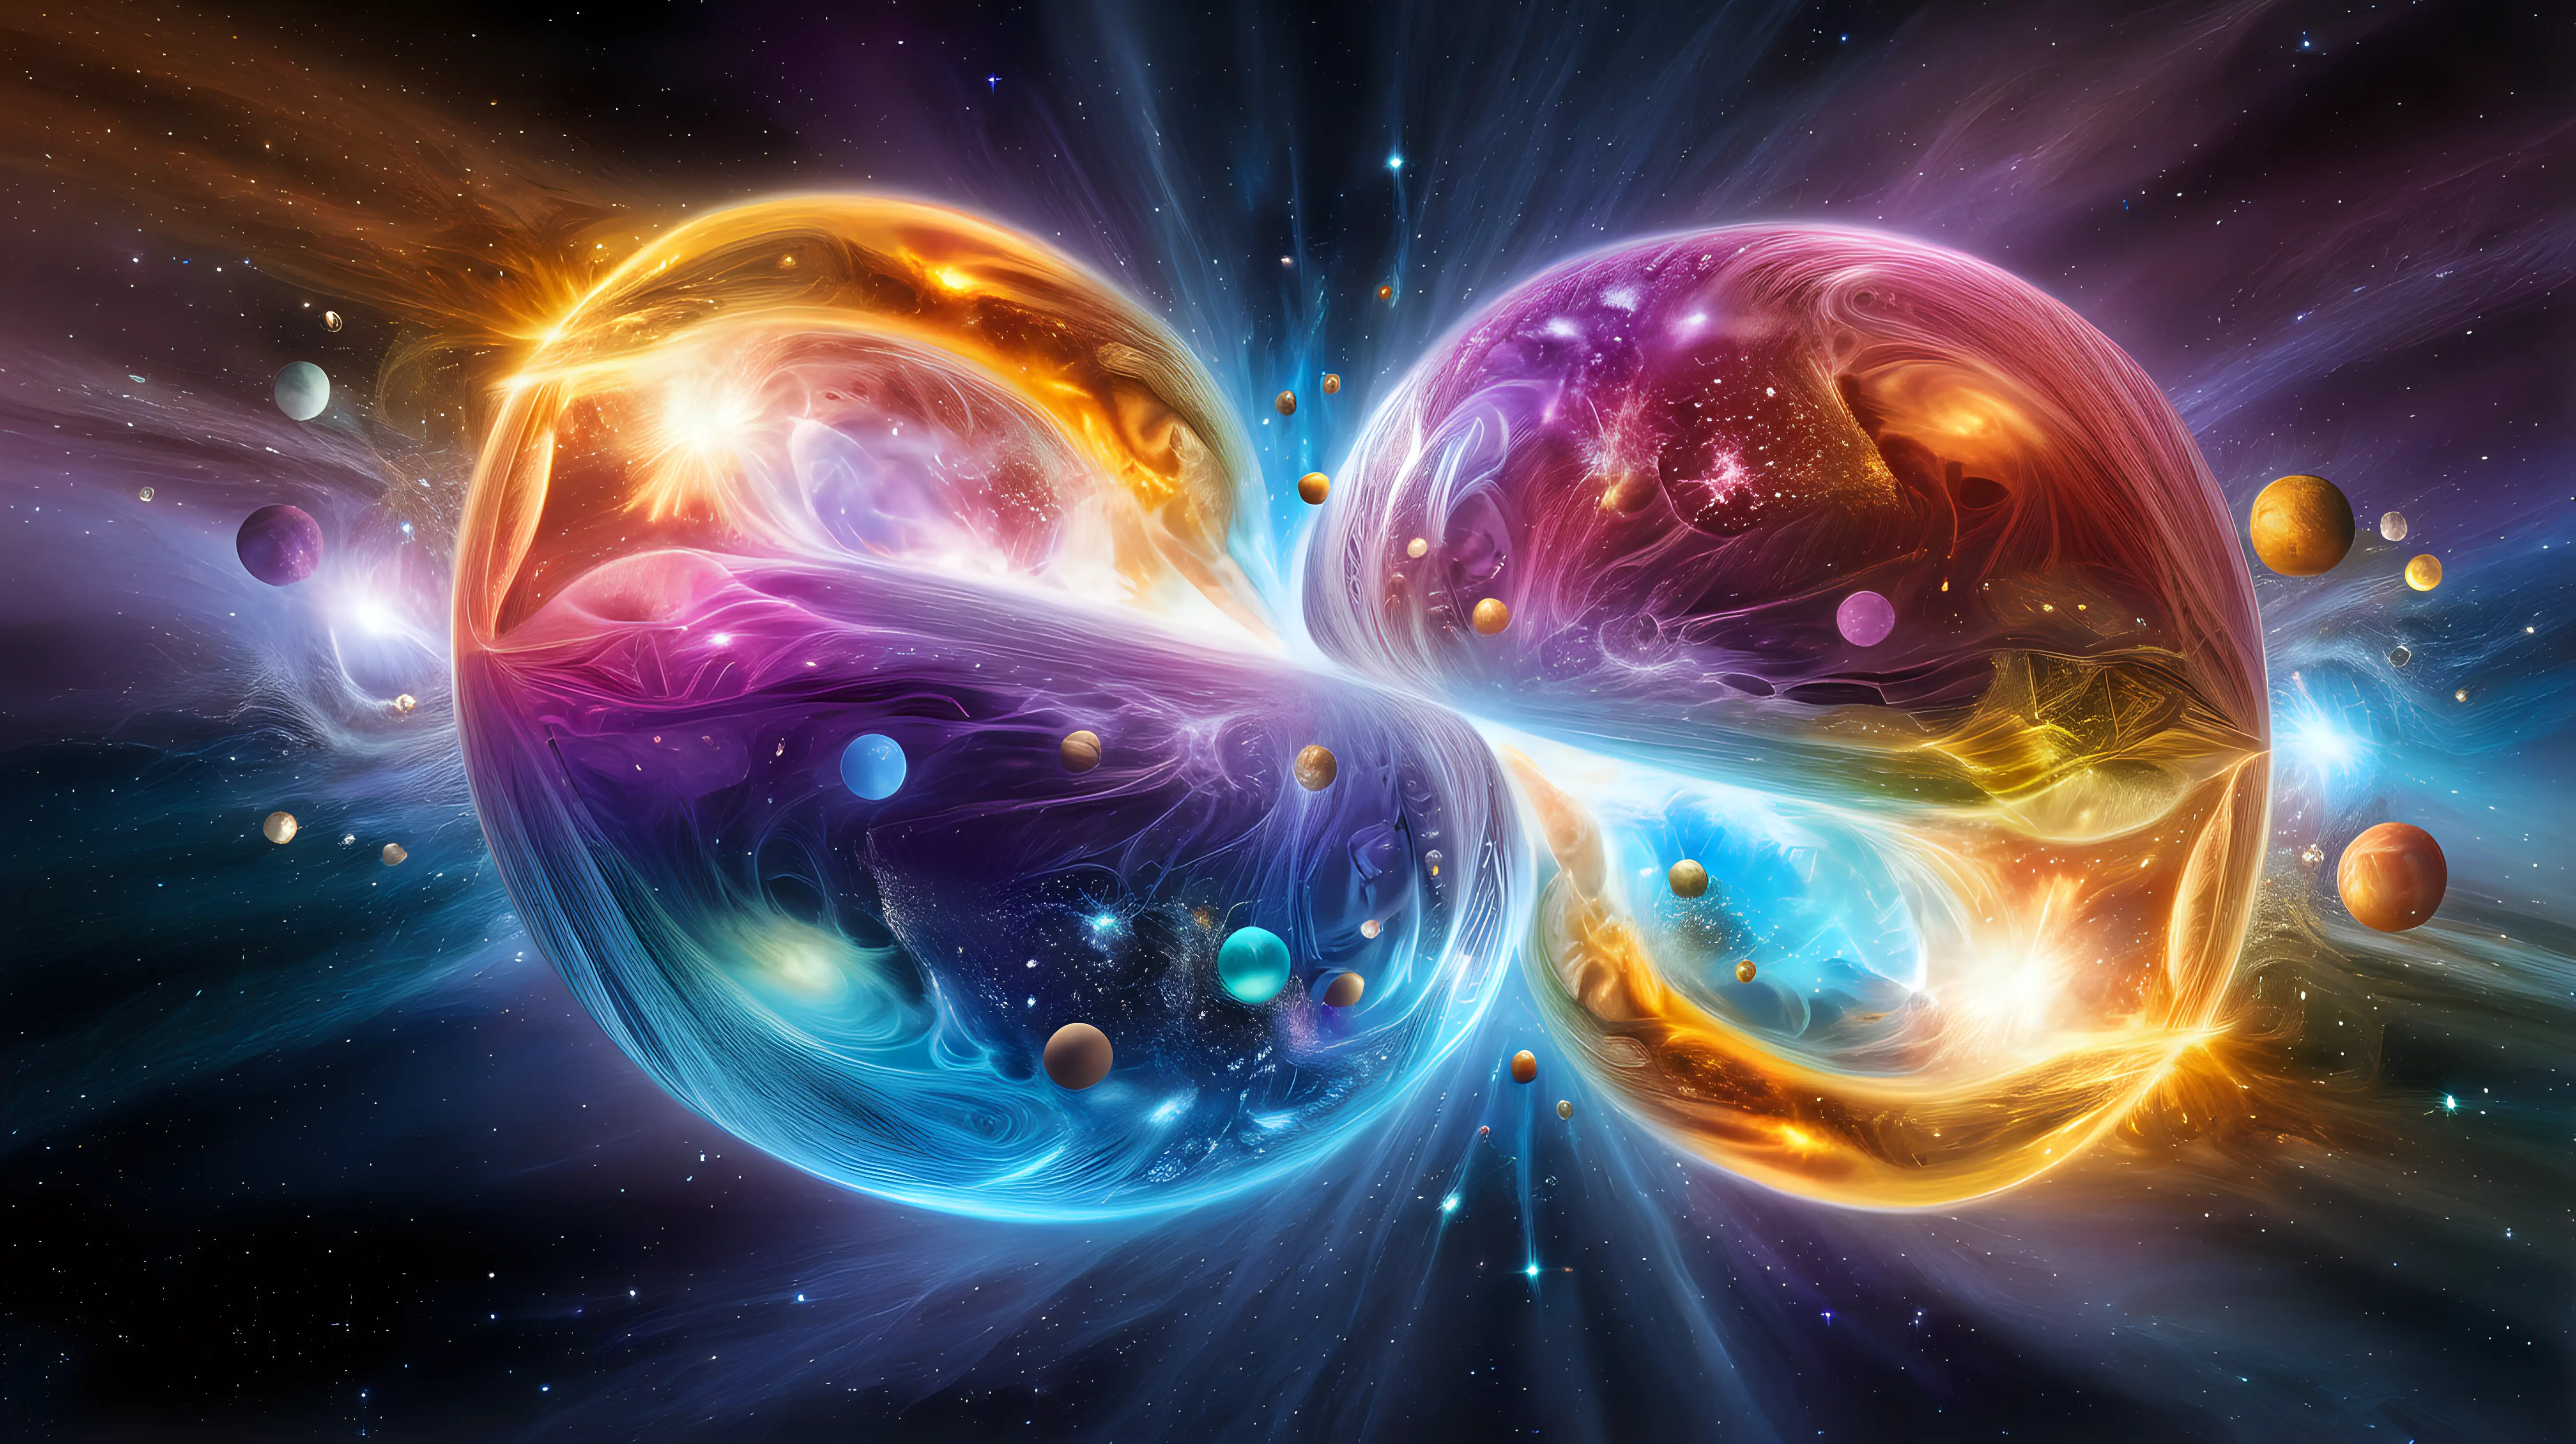 Cosmic Collision: Create an image that suggests a cosmic collision or convergence of luminous spheres, symbolizing a celestial event with vibrant colors and energy.